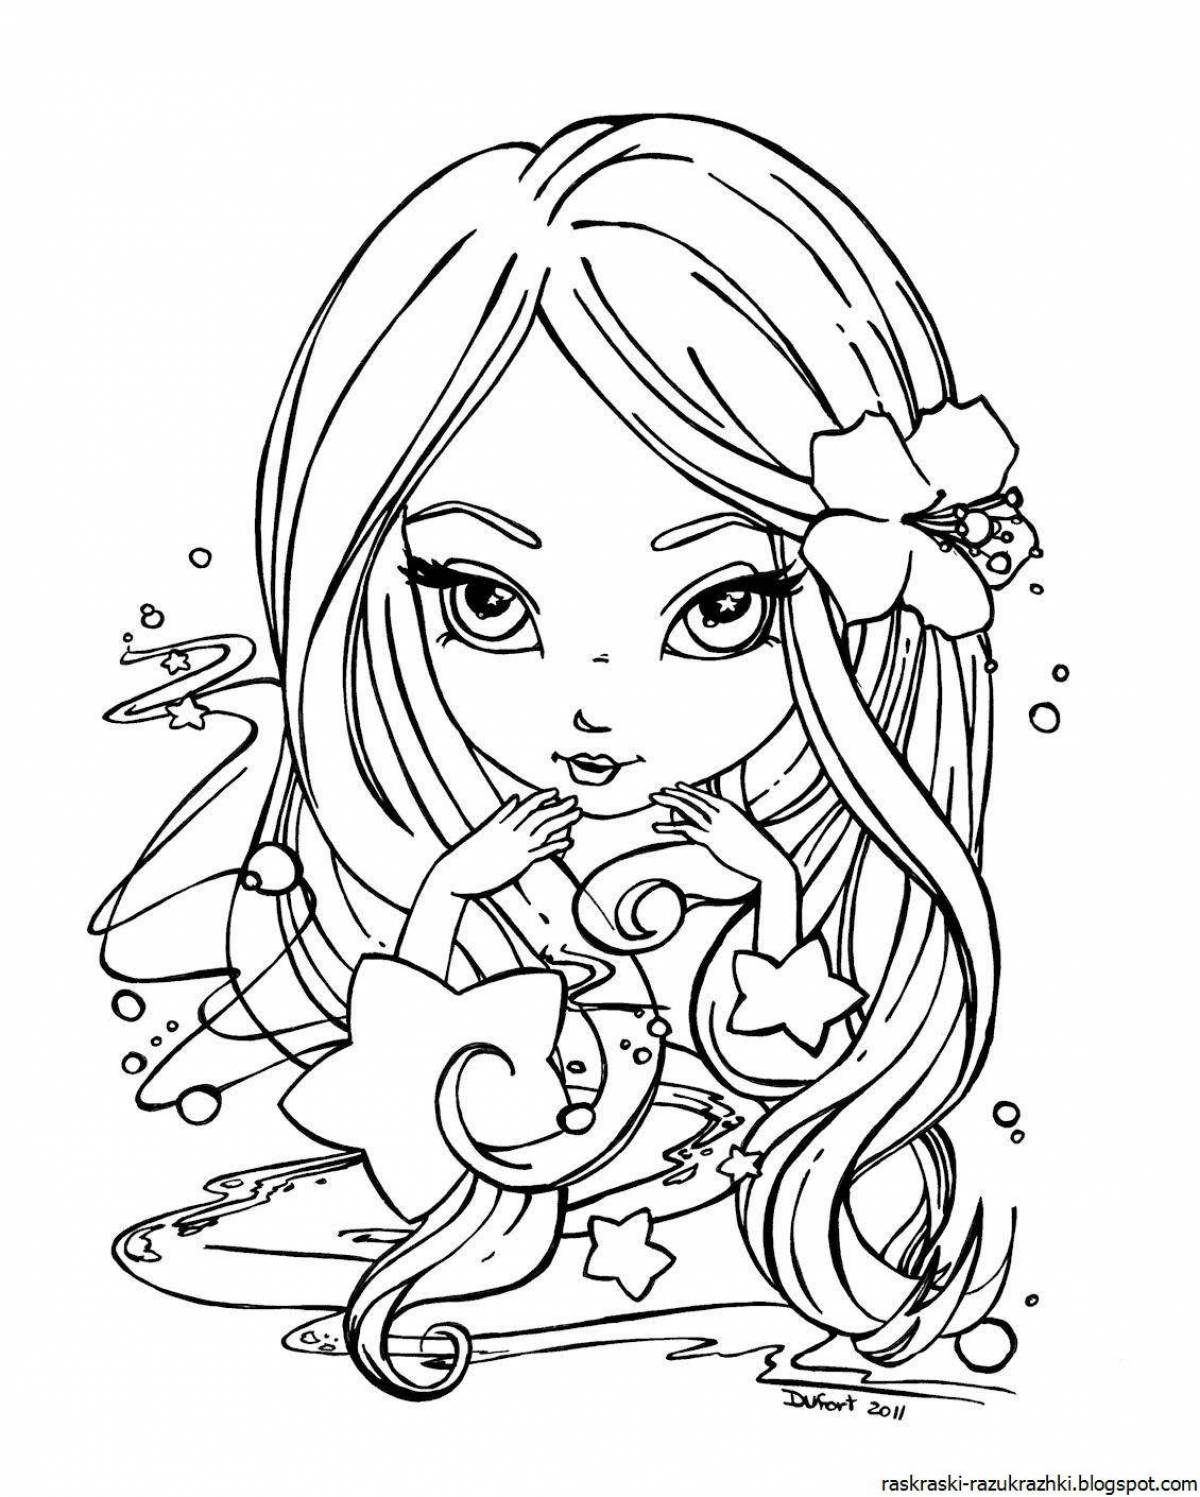 Animated coloring page drawn